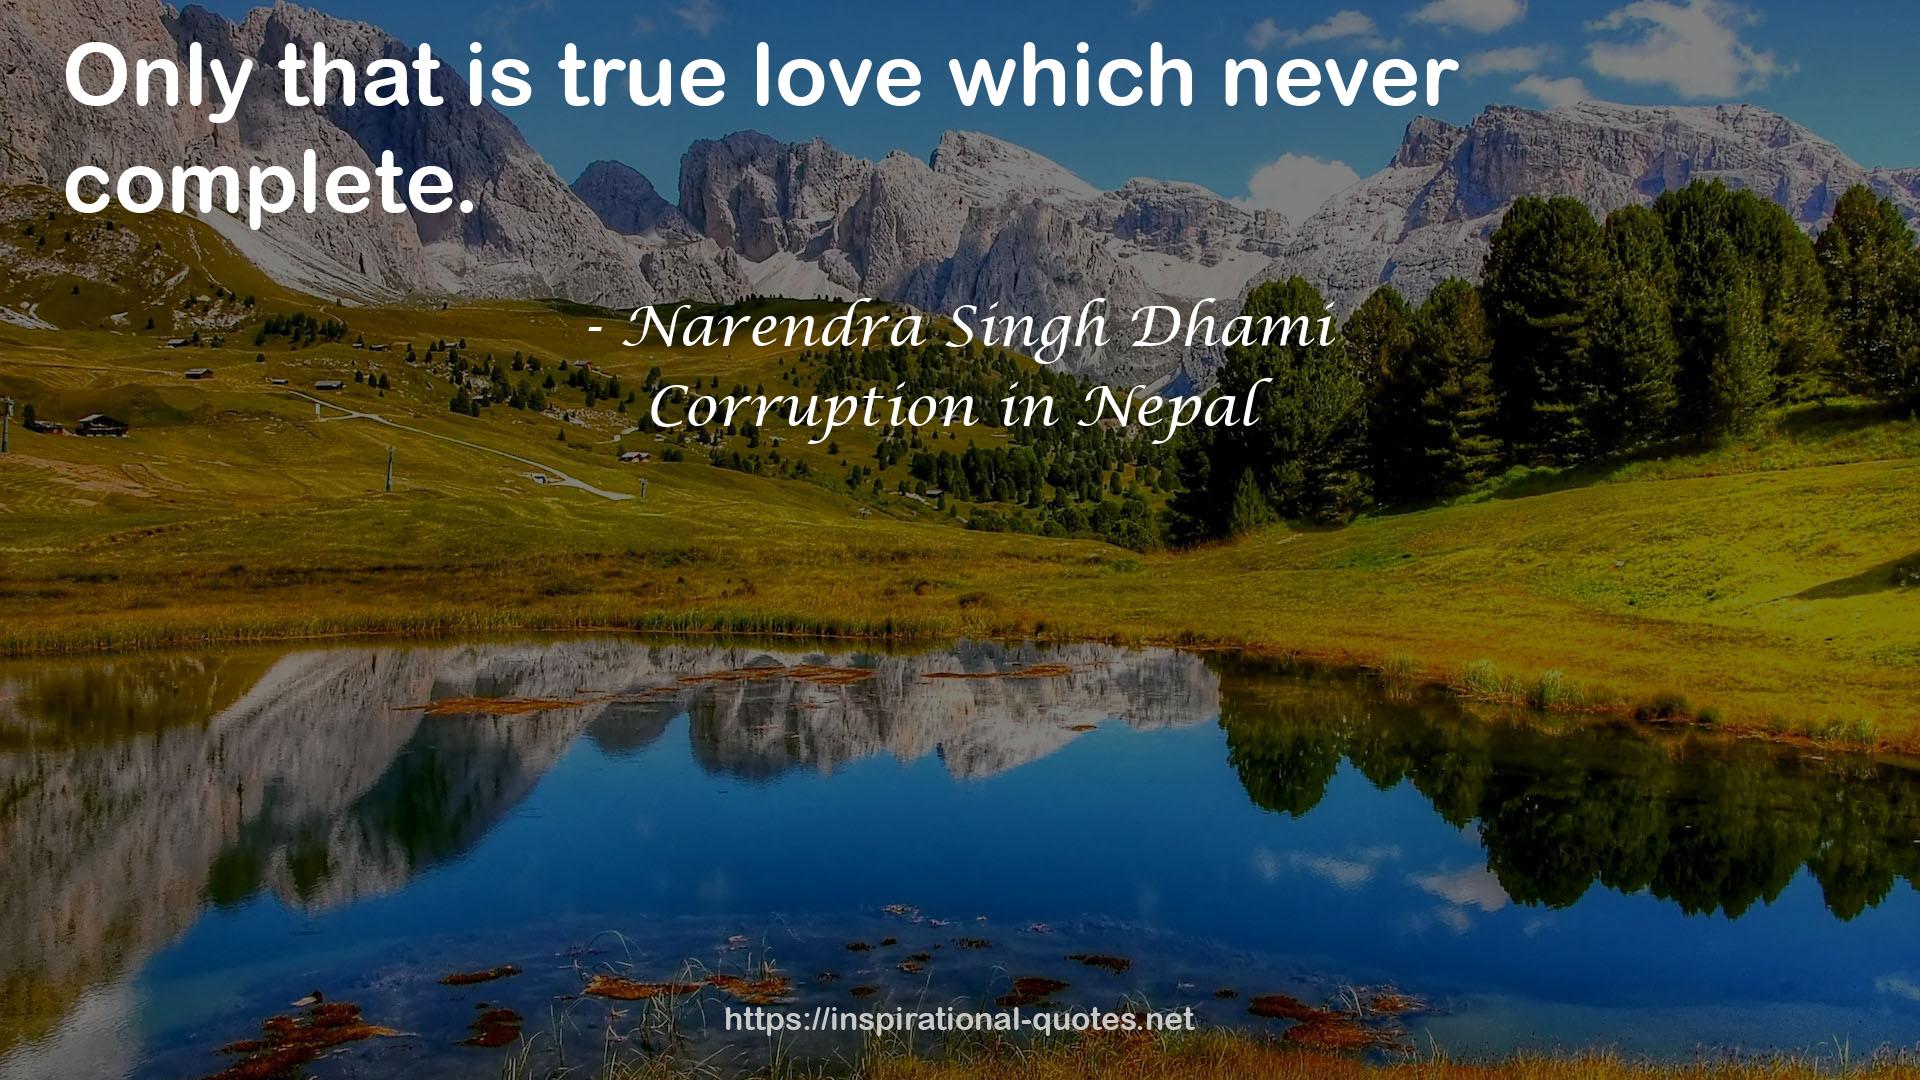 Corruption in Nepal QUOTES